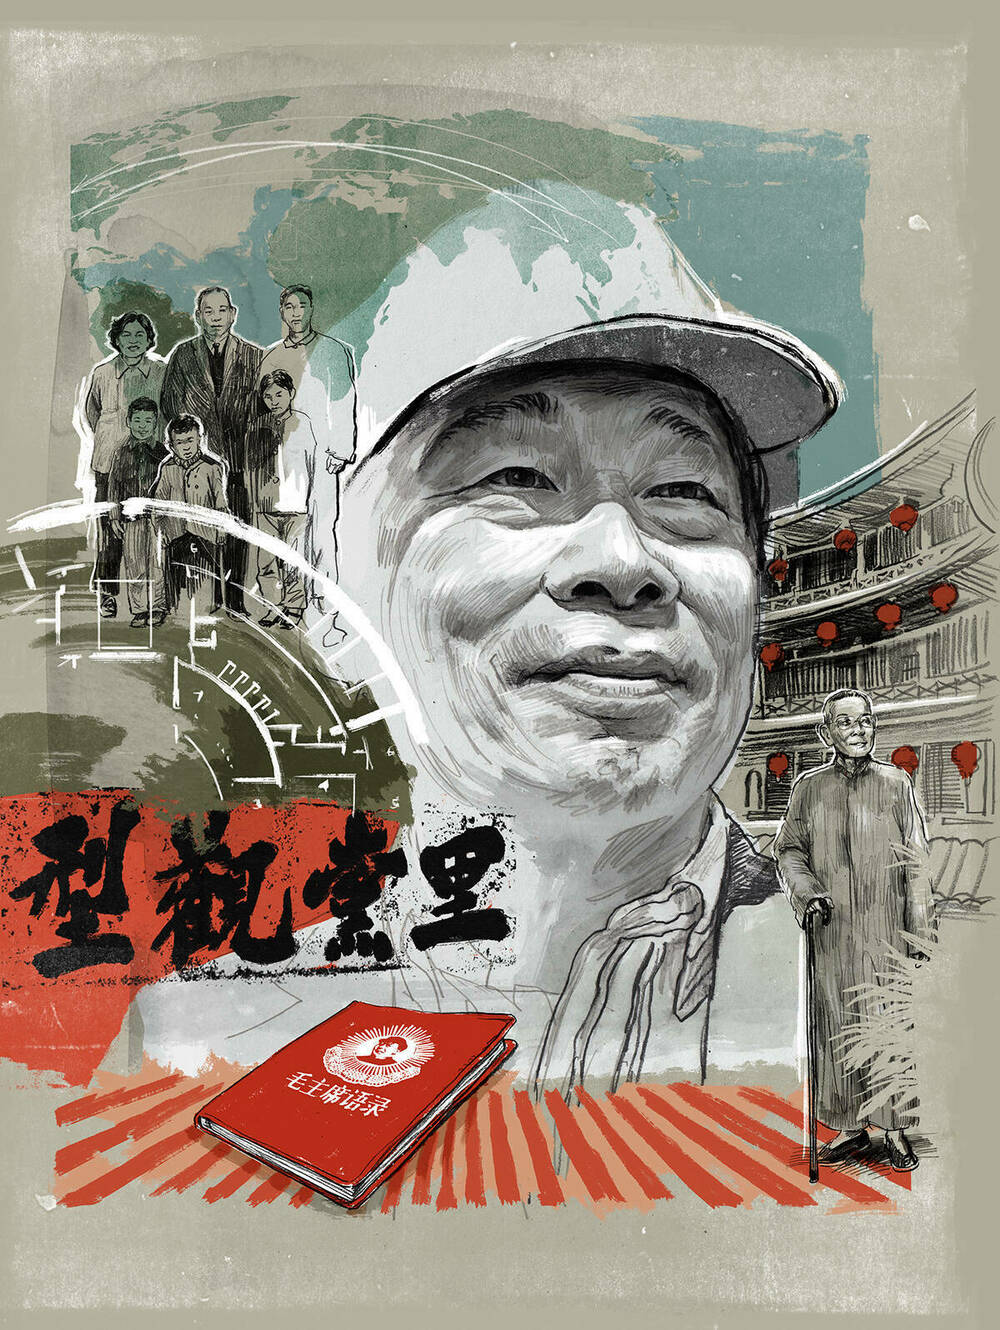 An illustration featuring an image of Cheng Wang at the center surrouded by images of his family, his ancestral home, Chinese characters and a book.